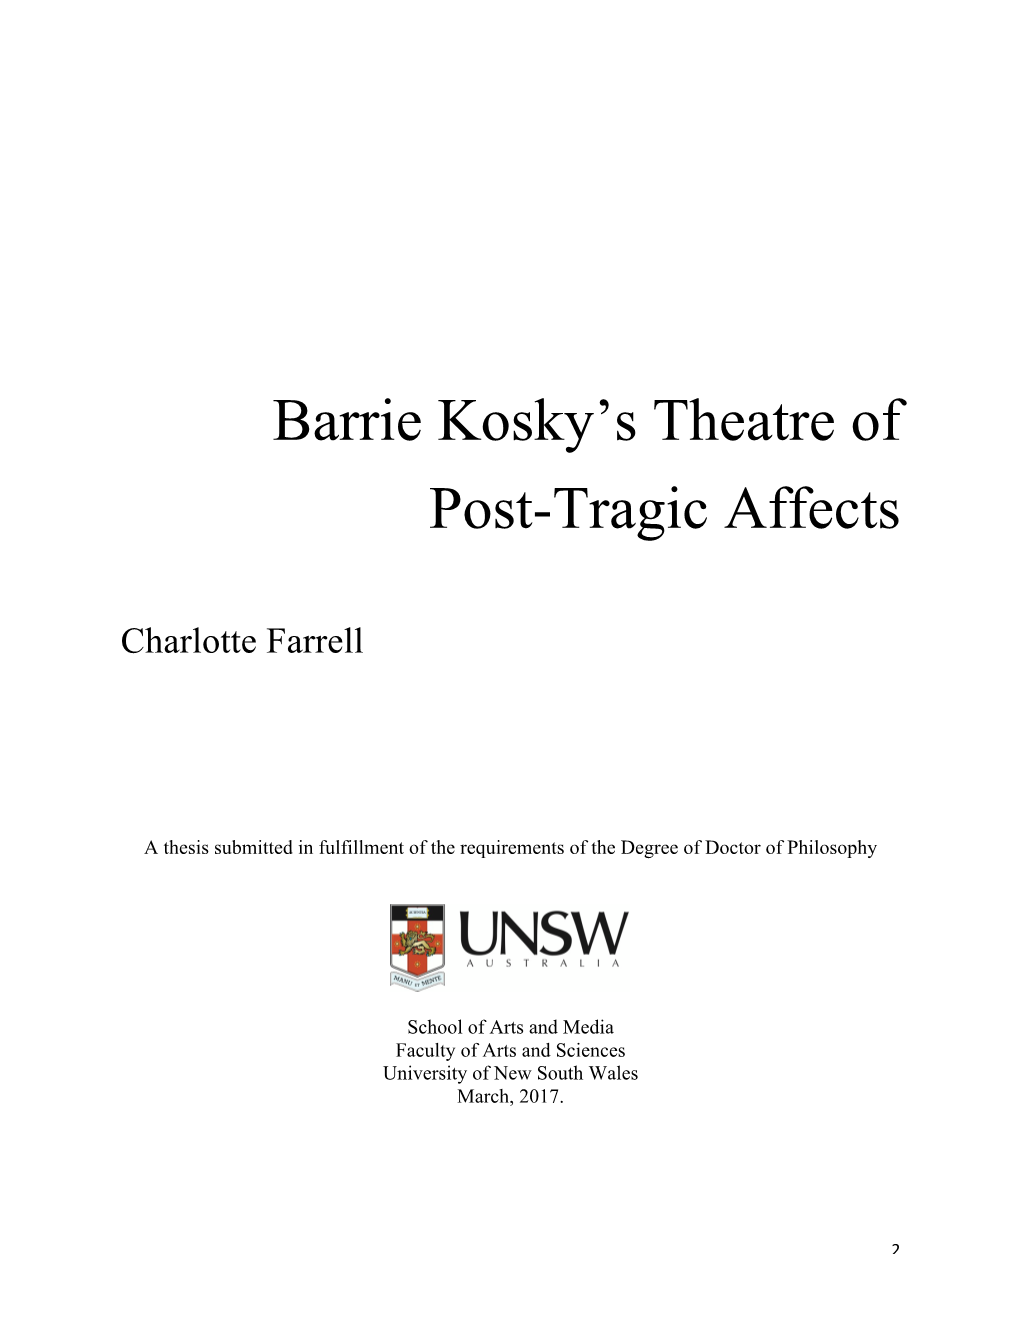 Barrie Kosky's Theatre of Post-Tragic Affects